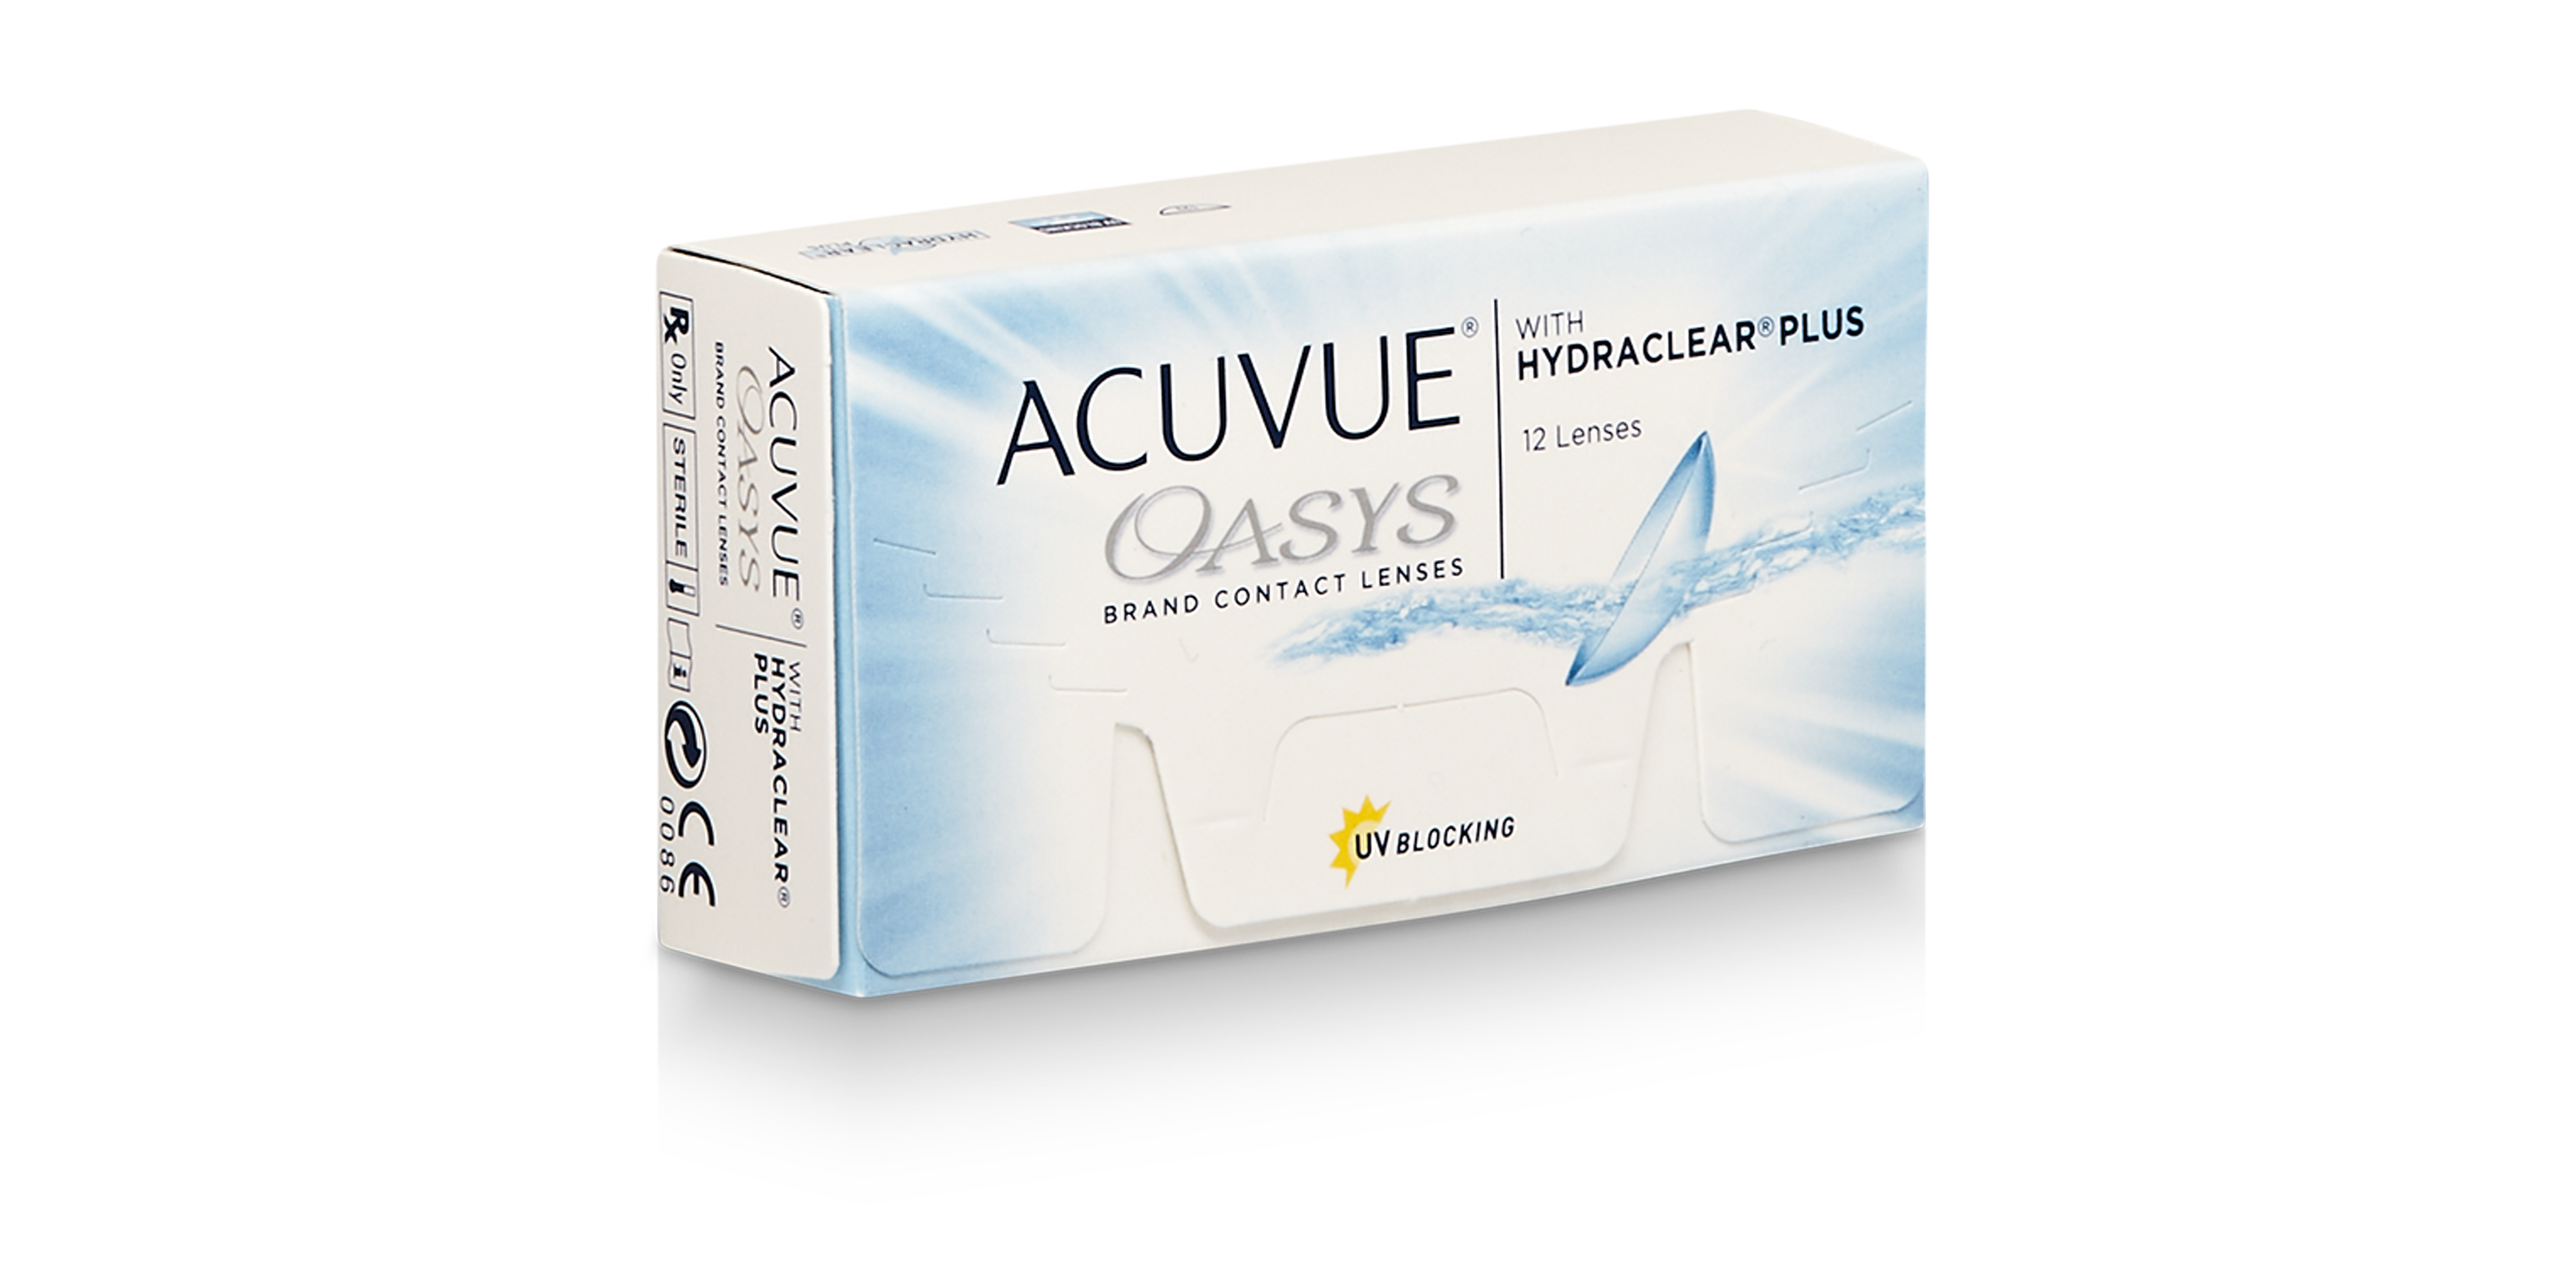 Acuvue oasys недельные. Acuvue Oasys with Hydraclear Plus. Acuvue Oasys with Hydraclear Plus Senofilcon a. Acuvue Oasys with Hydraclear Plus Senofilcon a 2023. Acuvue Oasys with Hydraclear Plus 24.